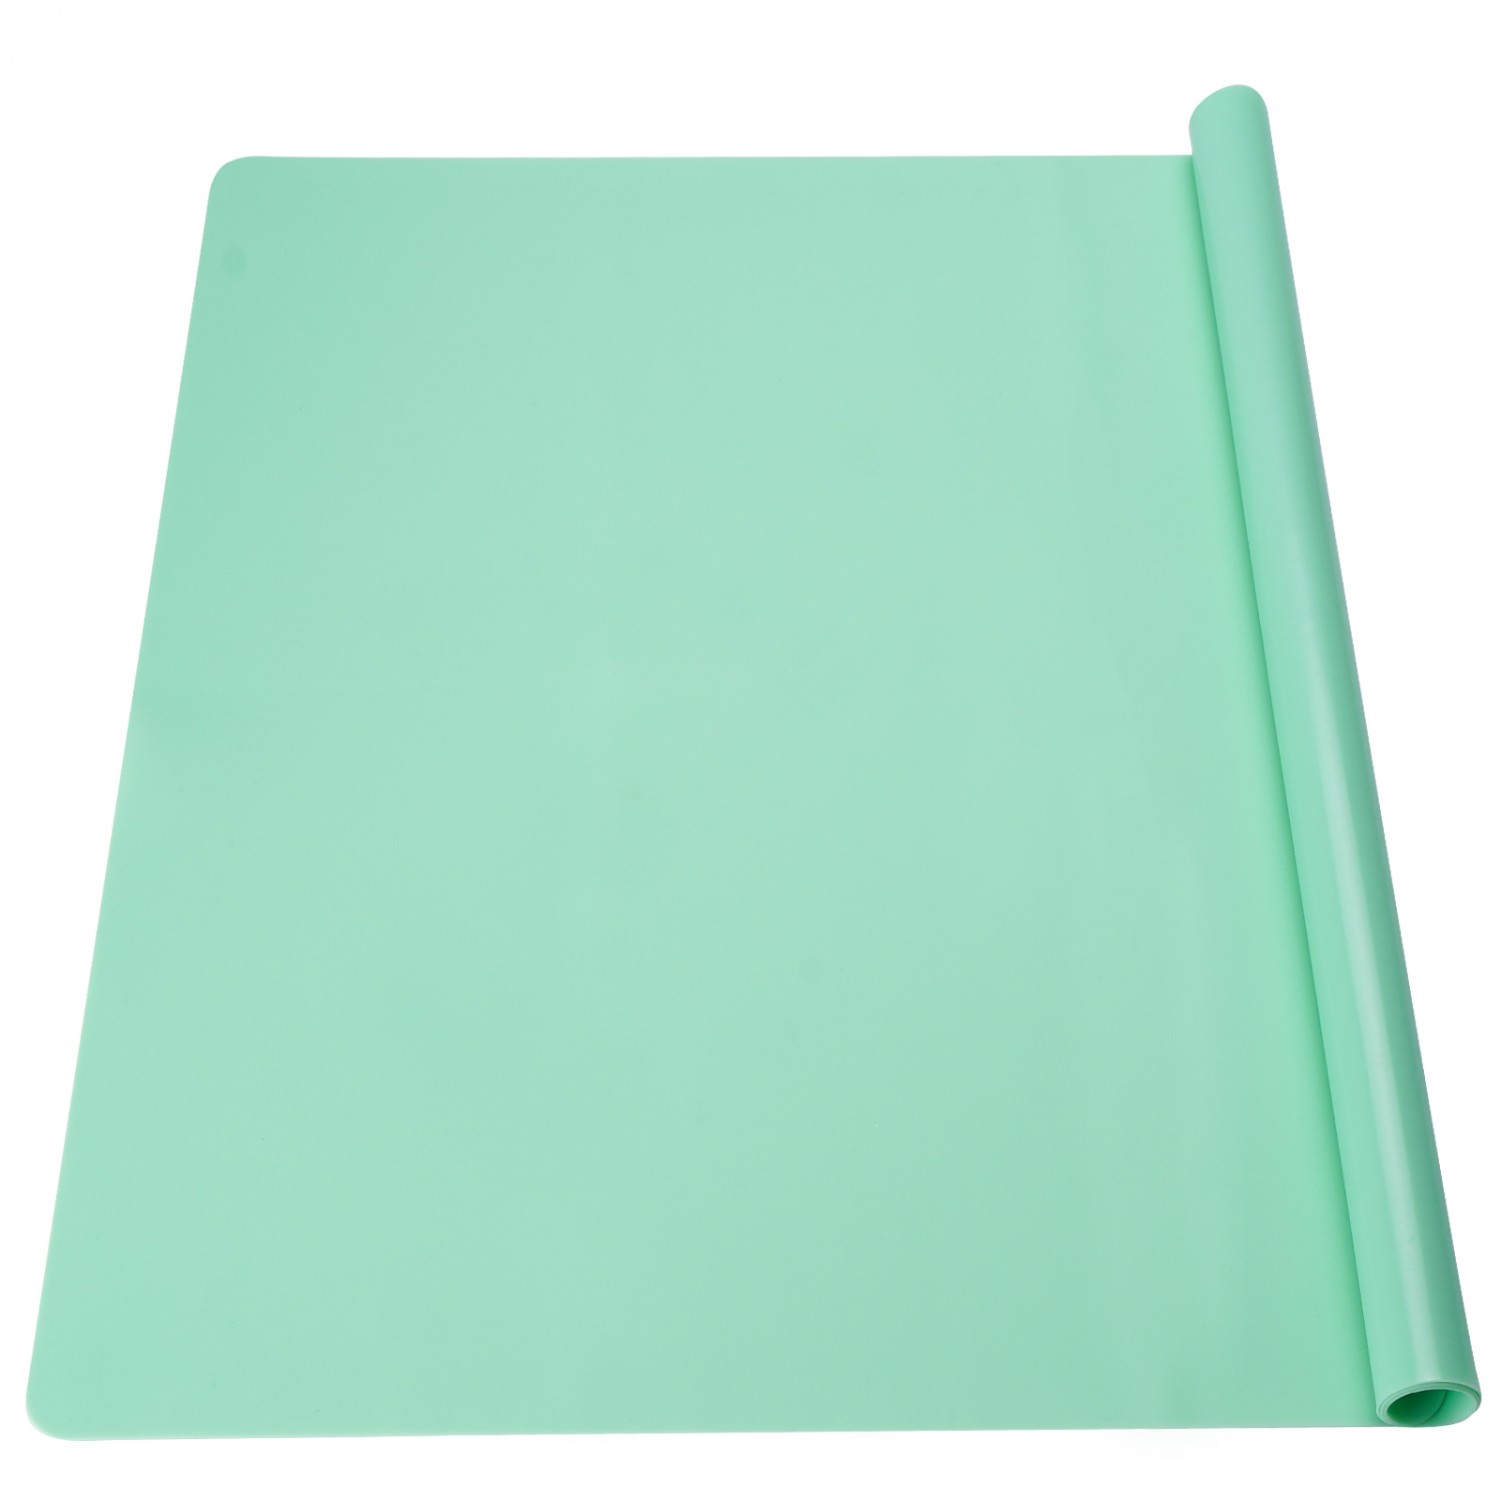 70x50cm Nonstick Silicone Crafts Table Mat